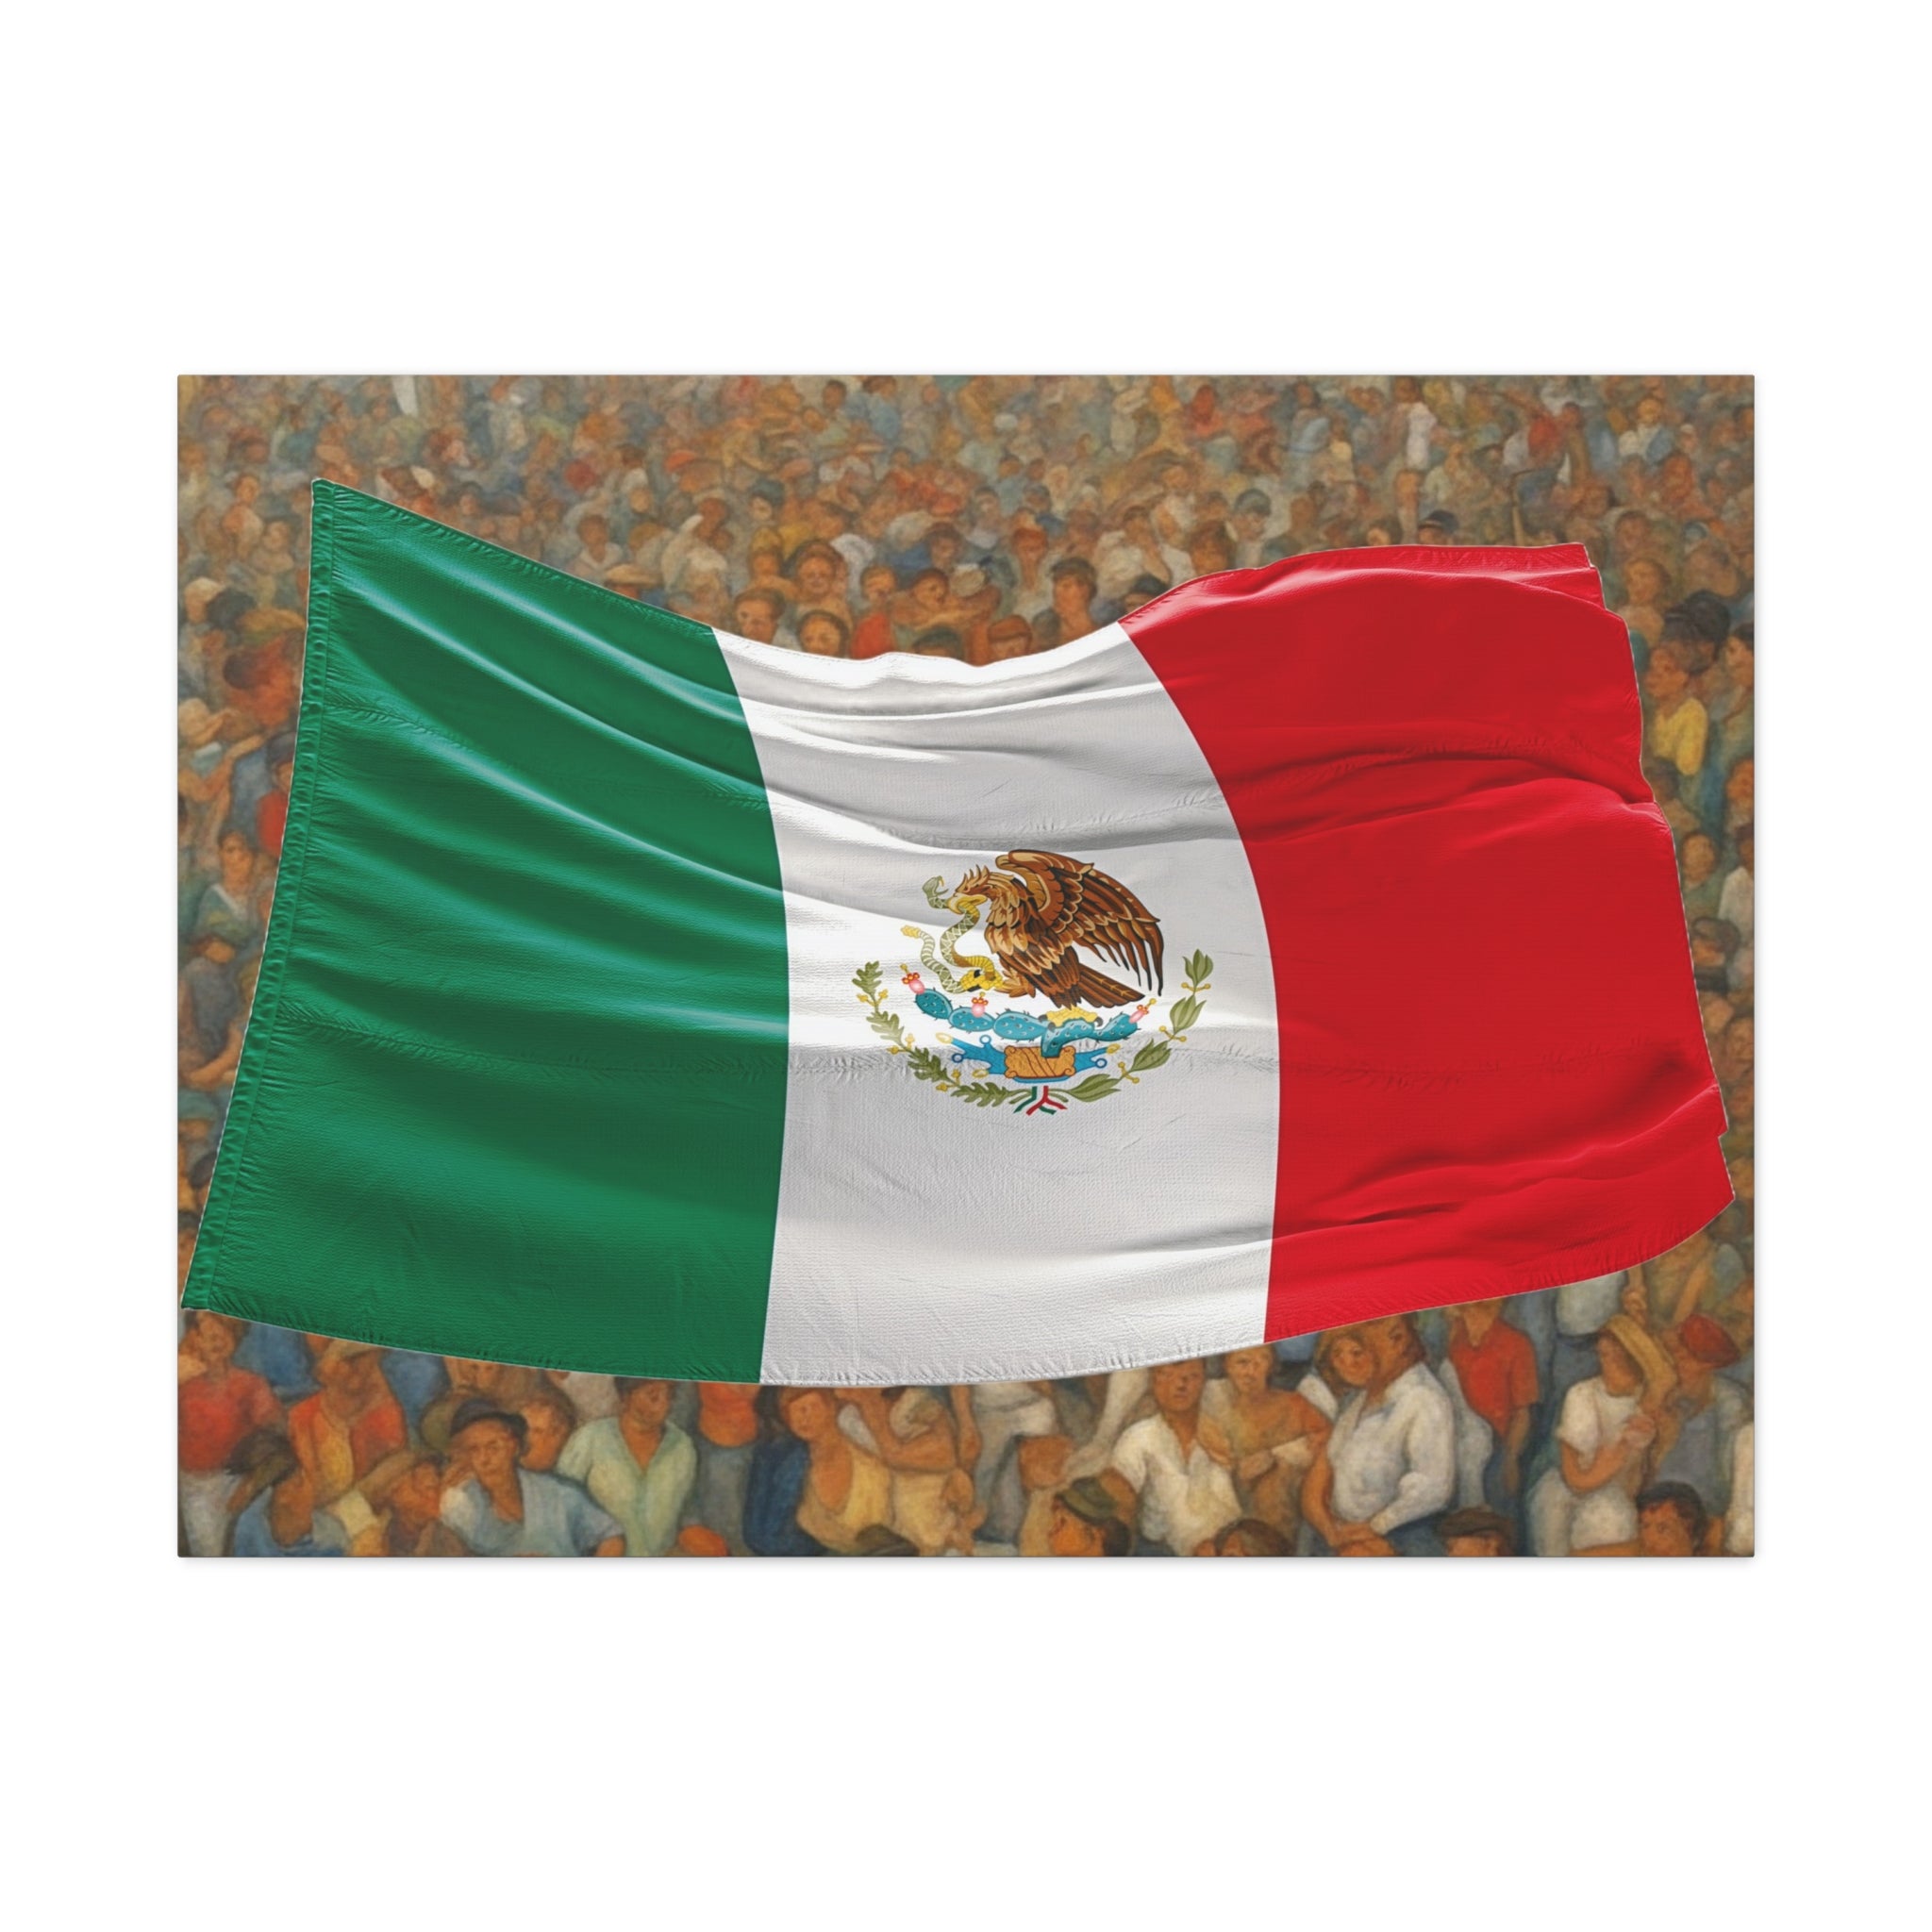 Wall Art MEXICAN MEXICO FLAG Canvas Print Painting Original Giclee GW Love Nice Beauty Fun Design Fit Hot House Home Office Gift Ready Hang